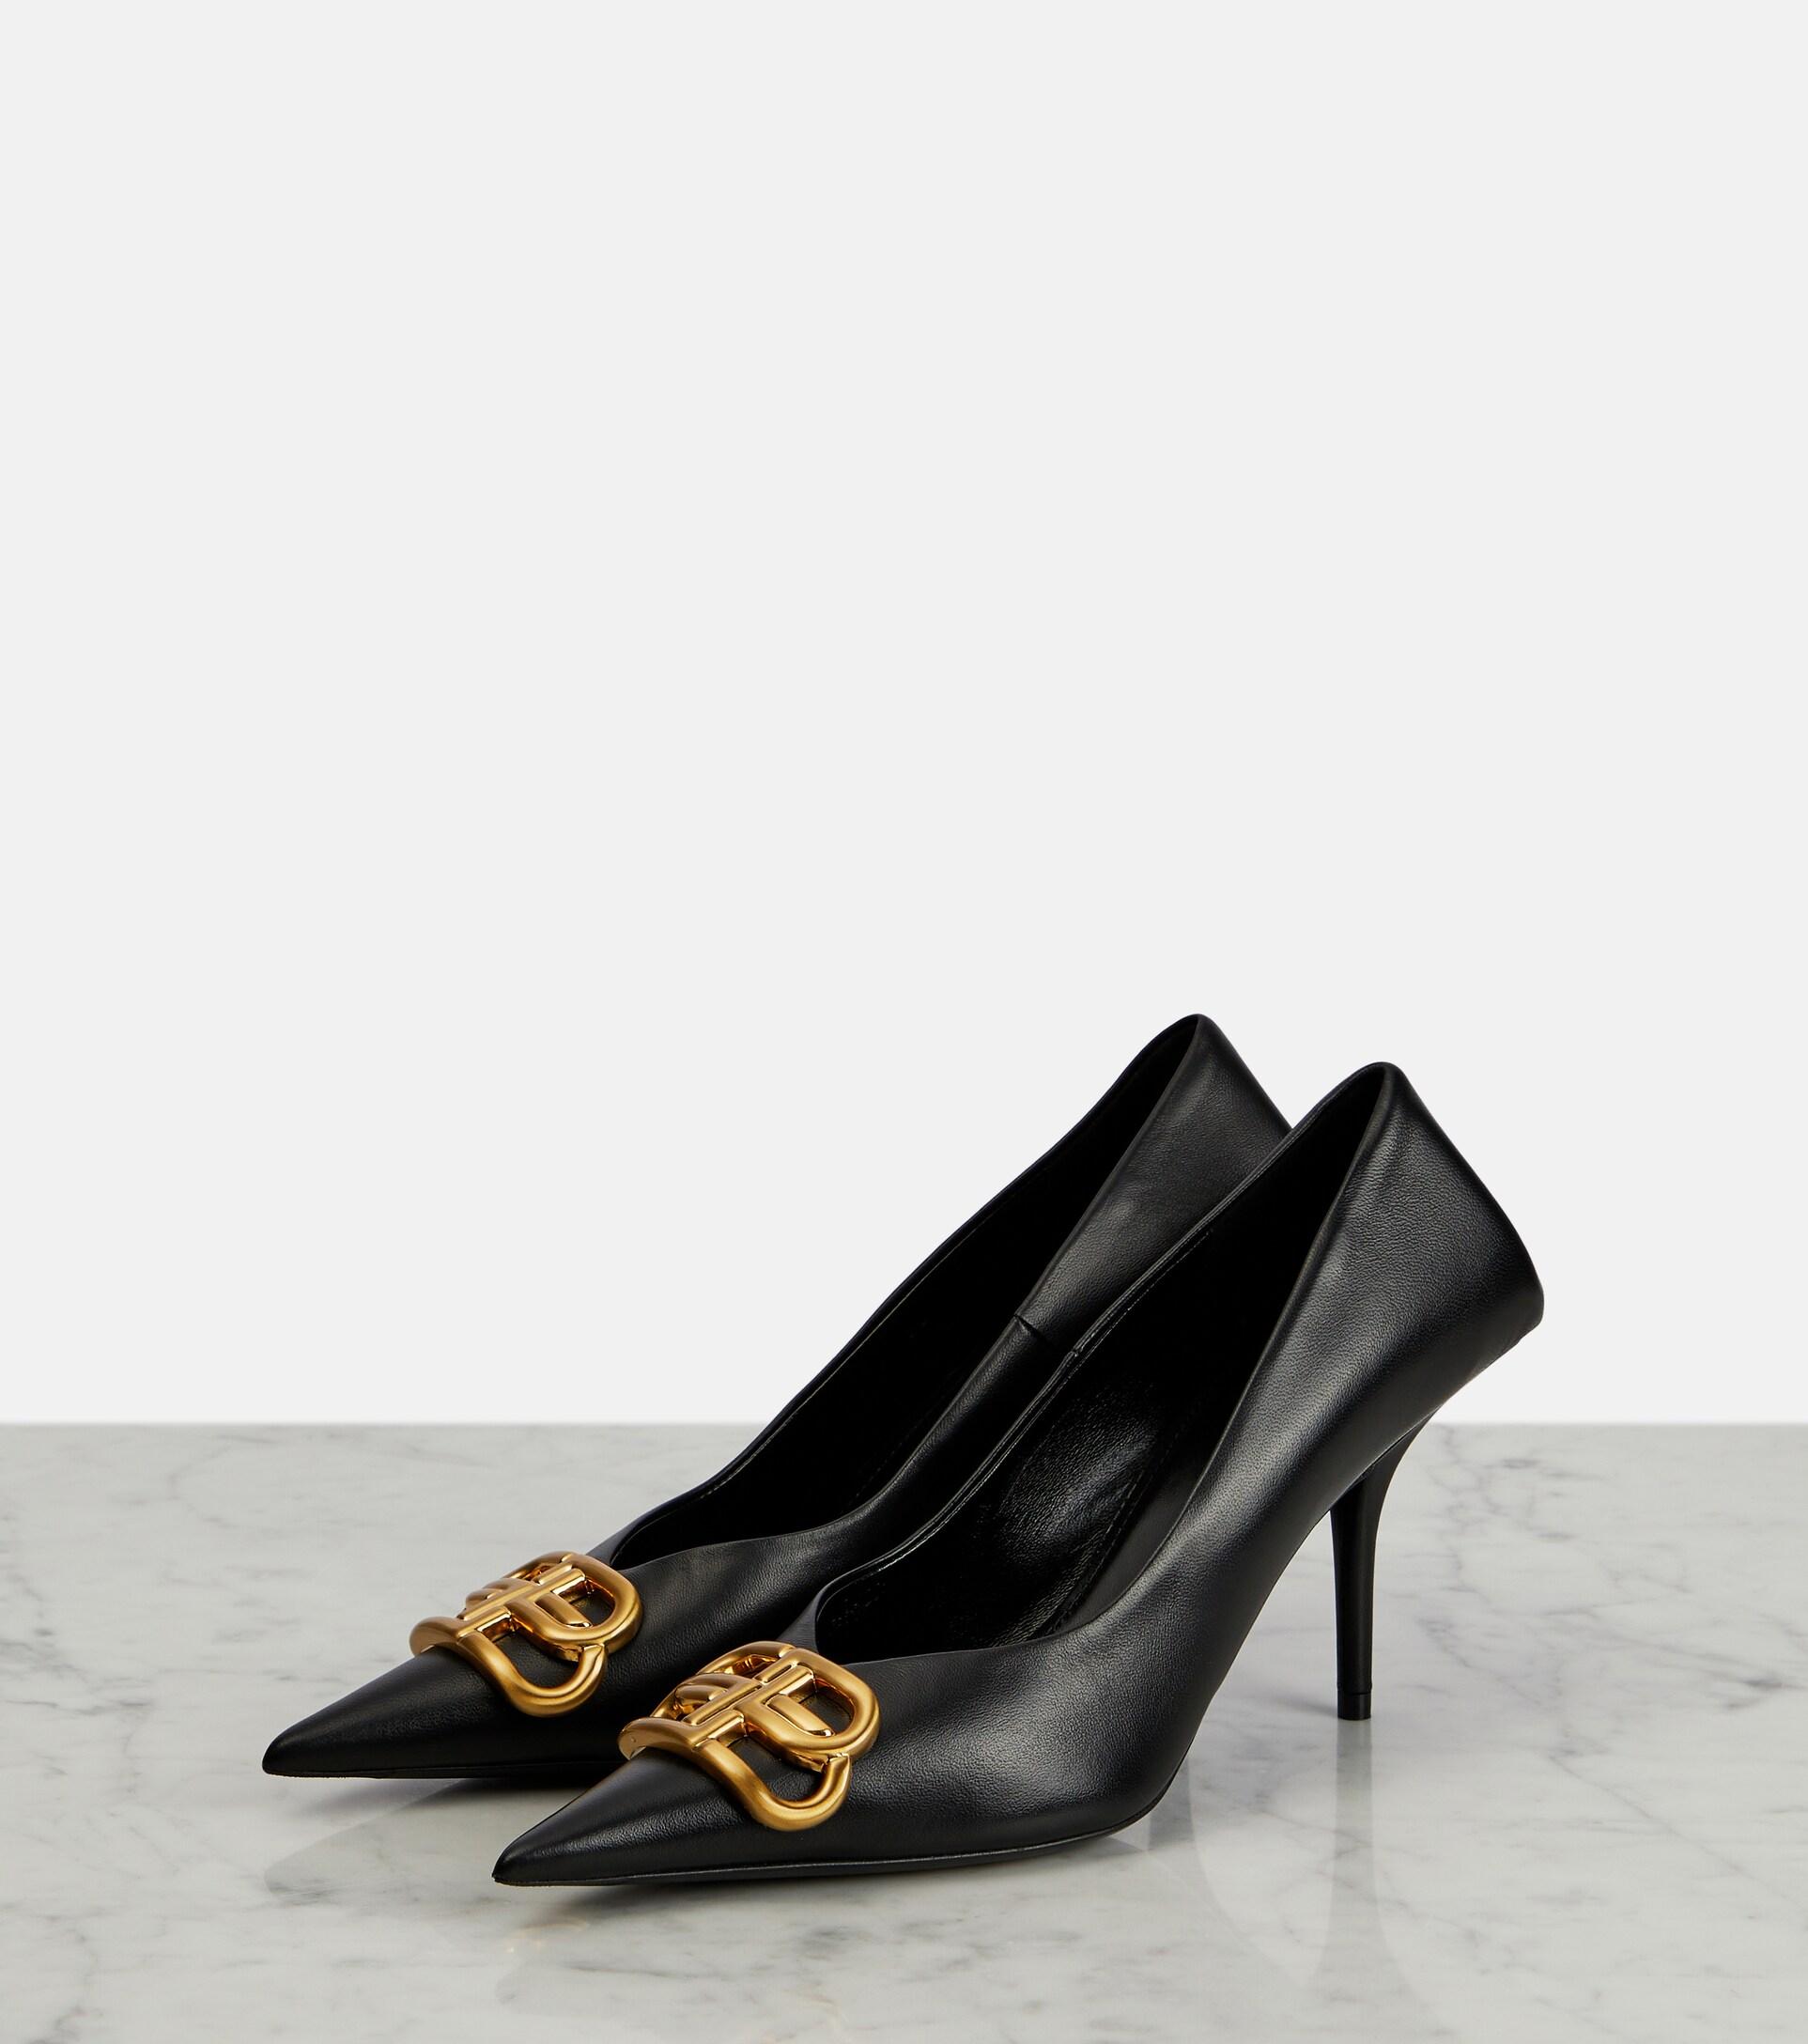 Balenciaga Square Knife Bb Leather Pumps in Black | Lyst